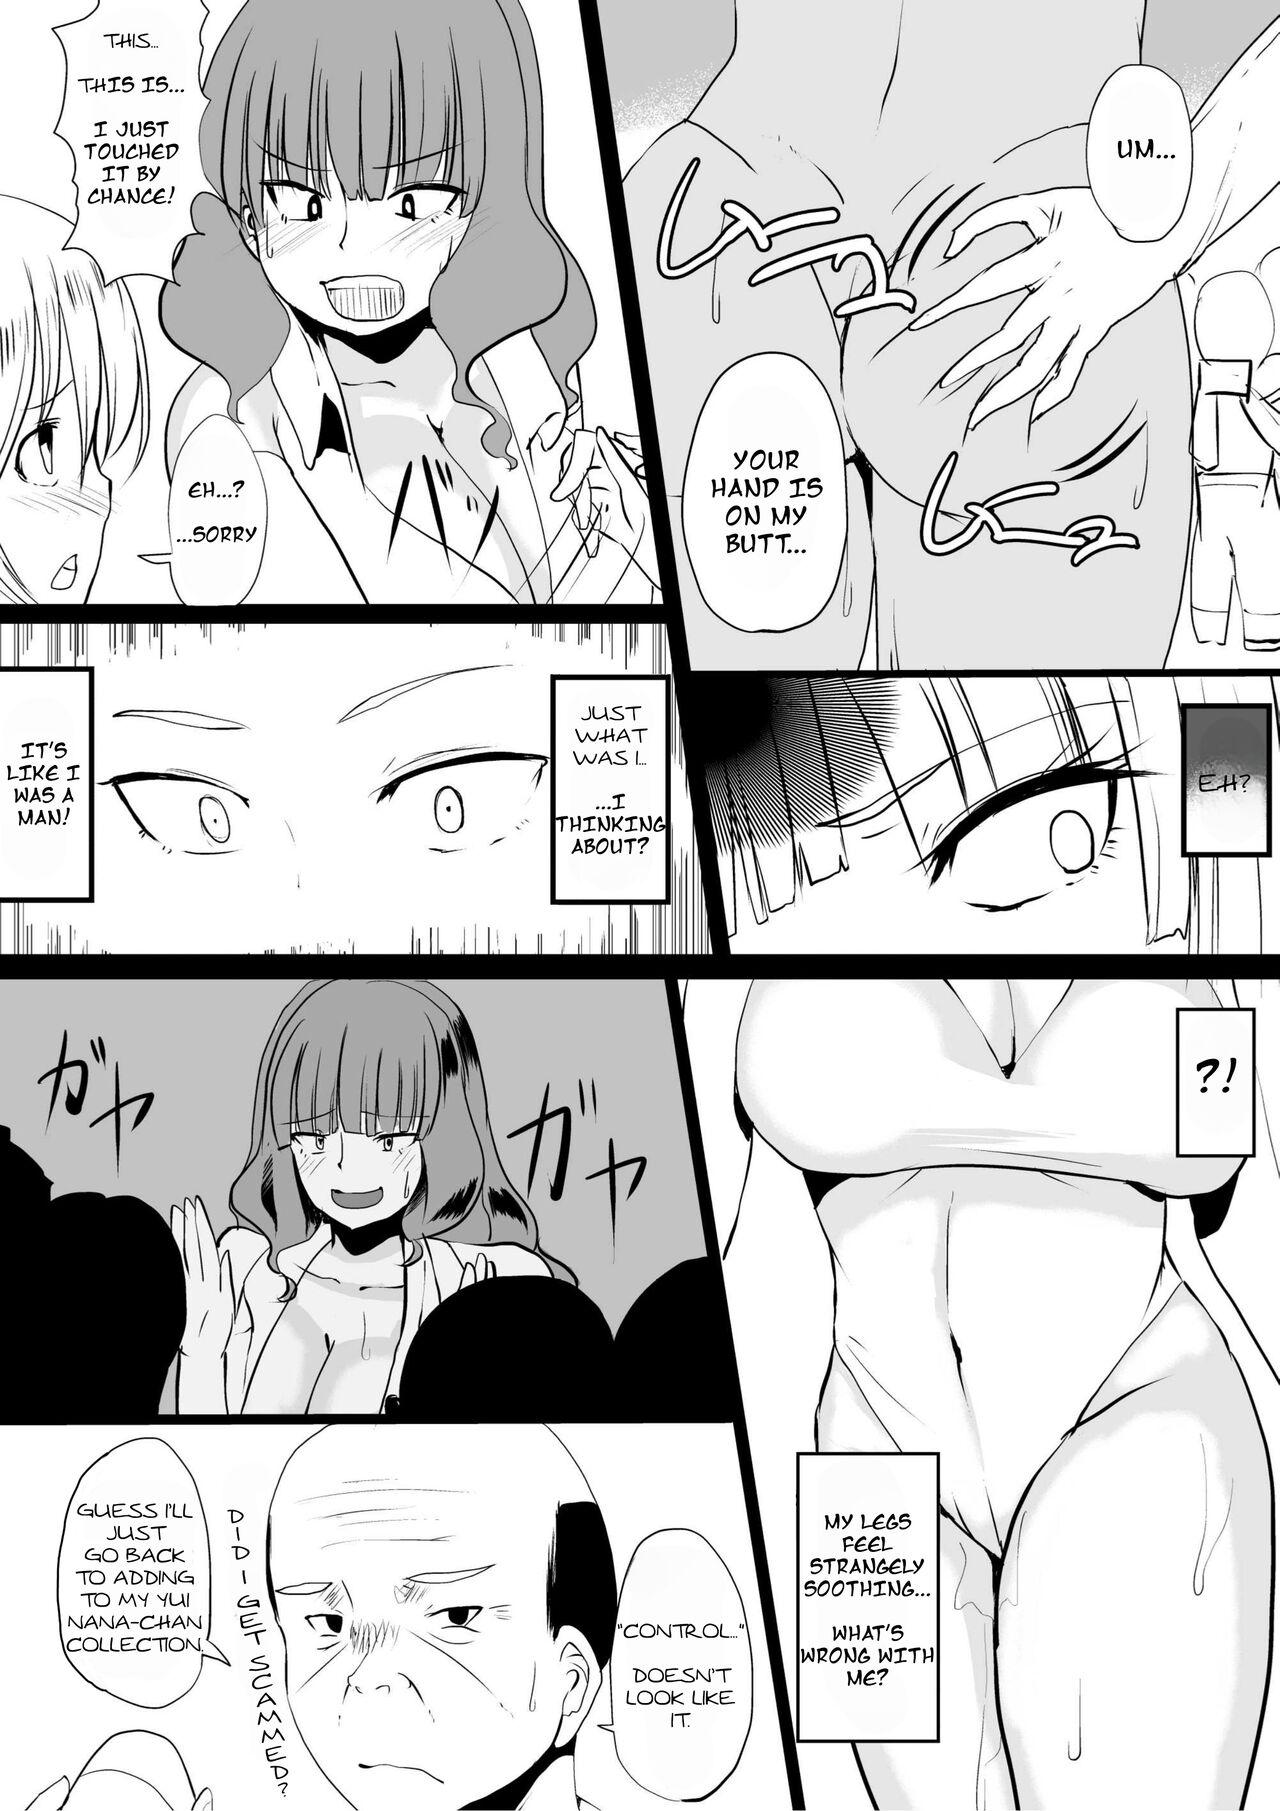 Awesome Onna no Kokoro o Ossanka Suru Camera | Changing a Woman's Heart to an Old Man's With a Camera - Original Hot Wife - Page 6